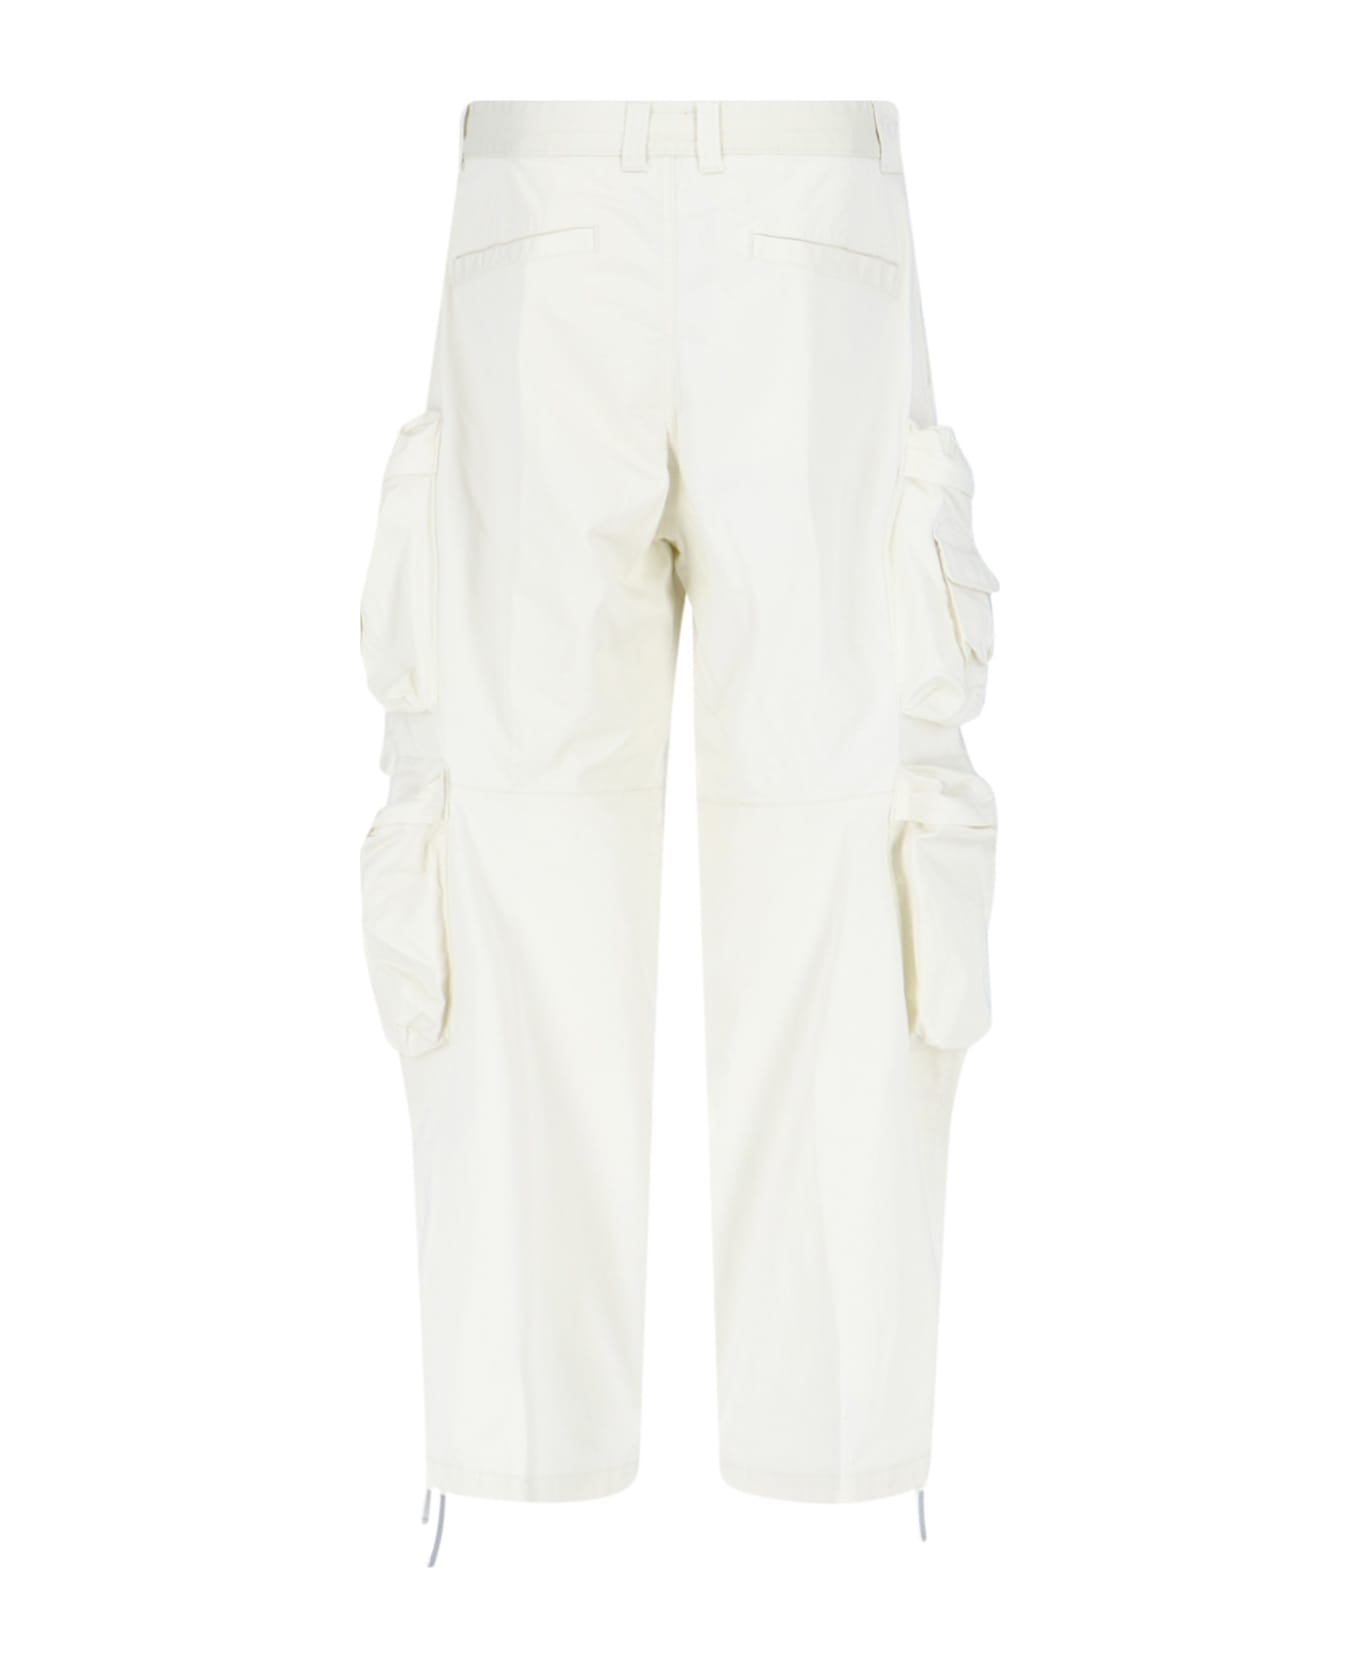 Diesel Cargo Wide Pants - White ボトムス